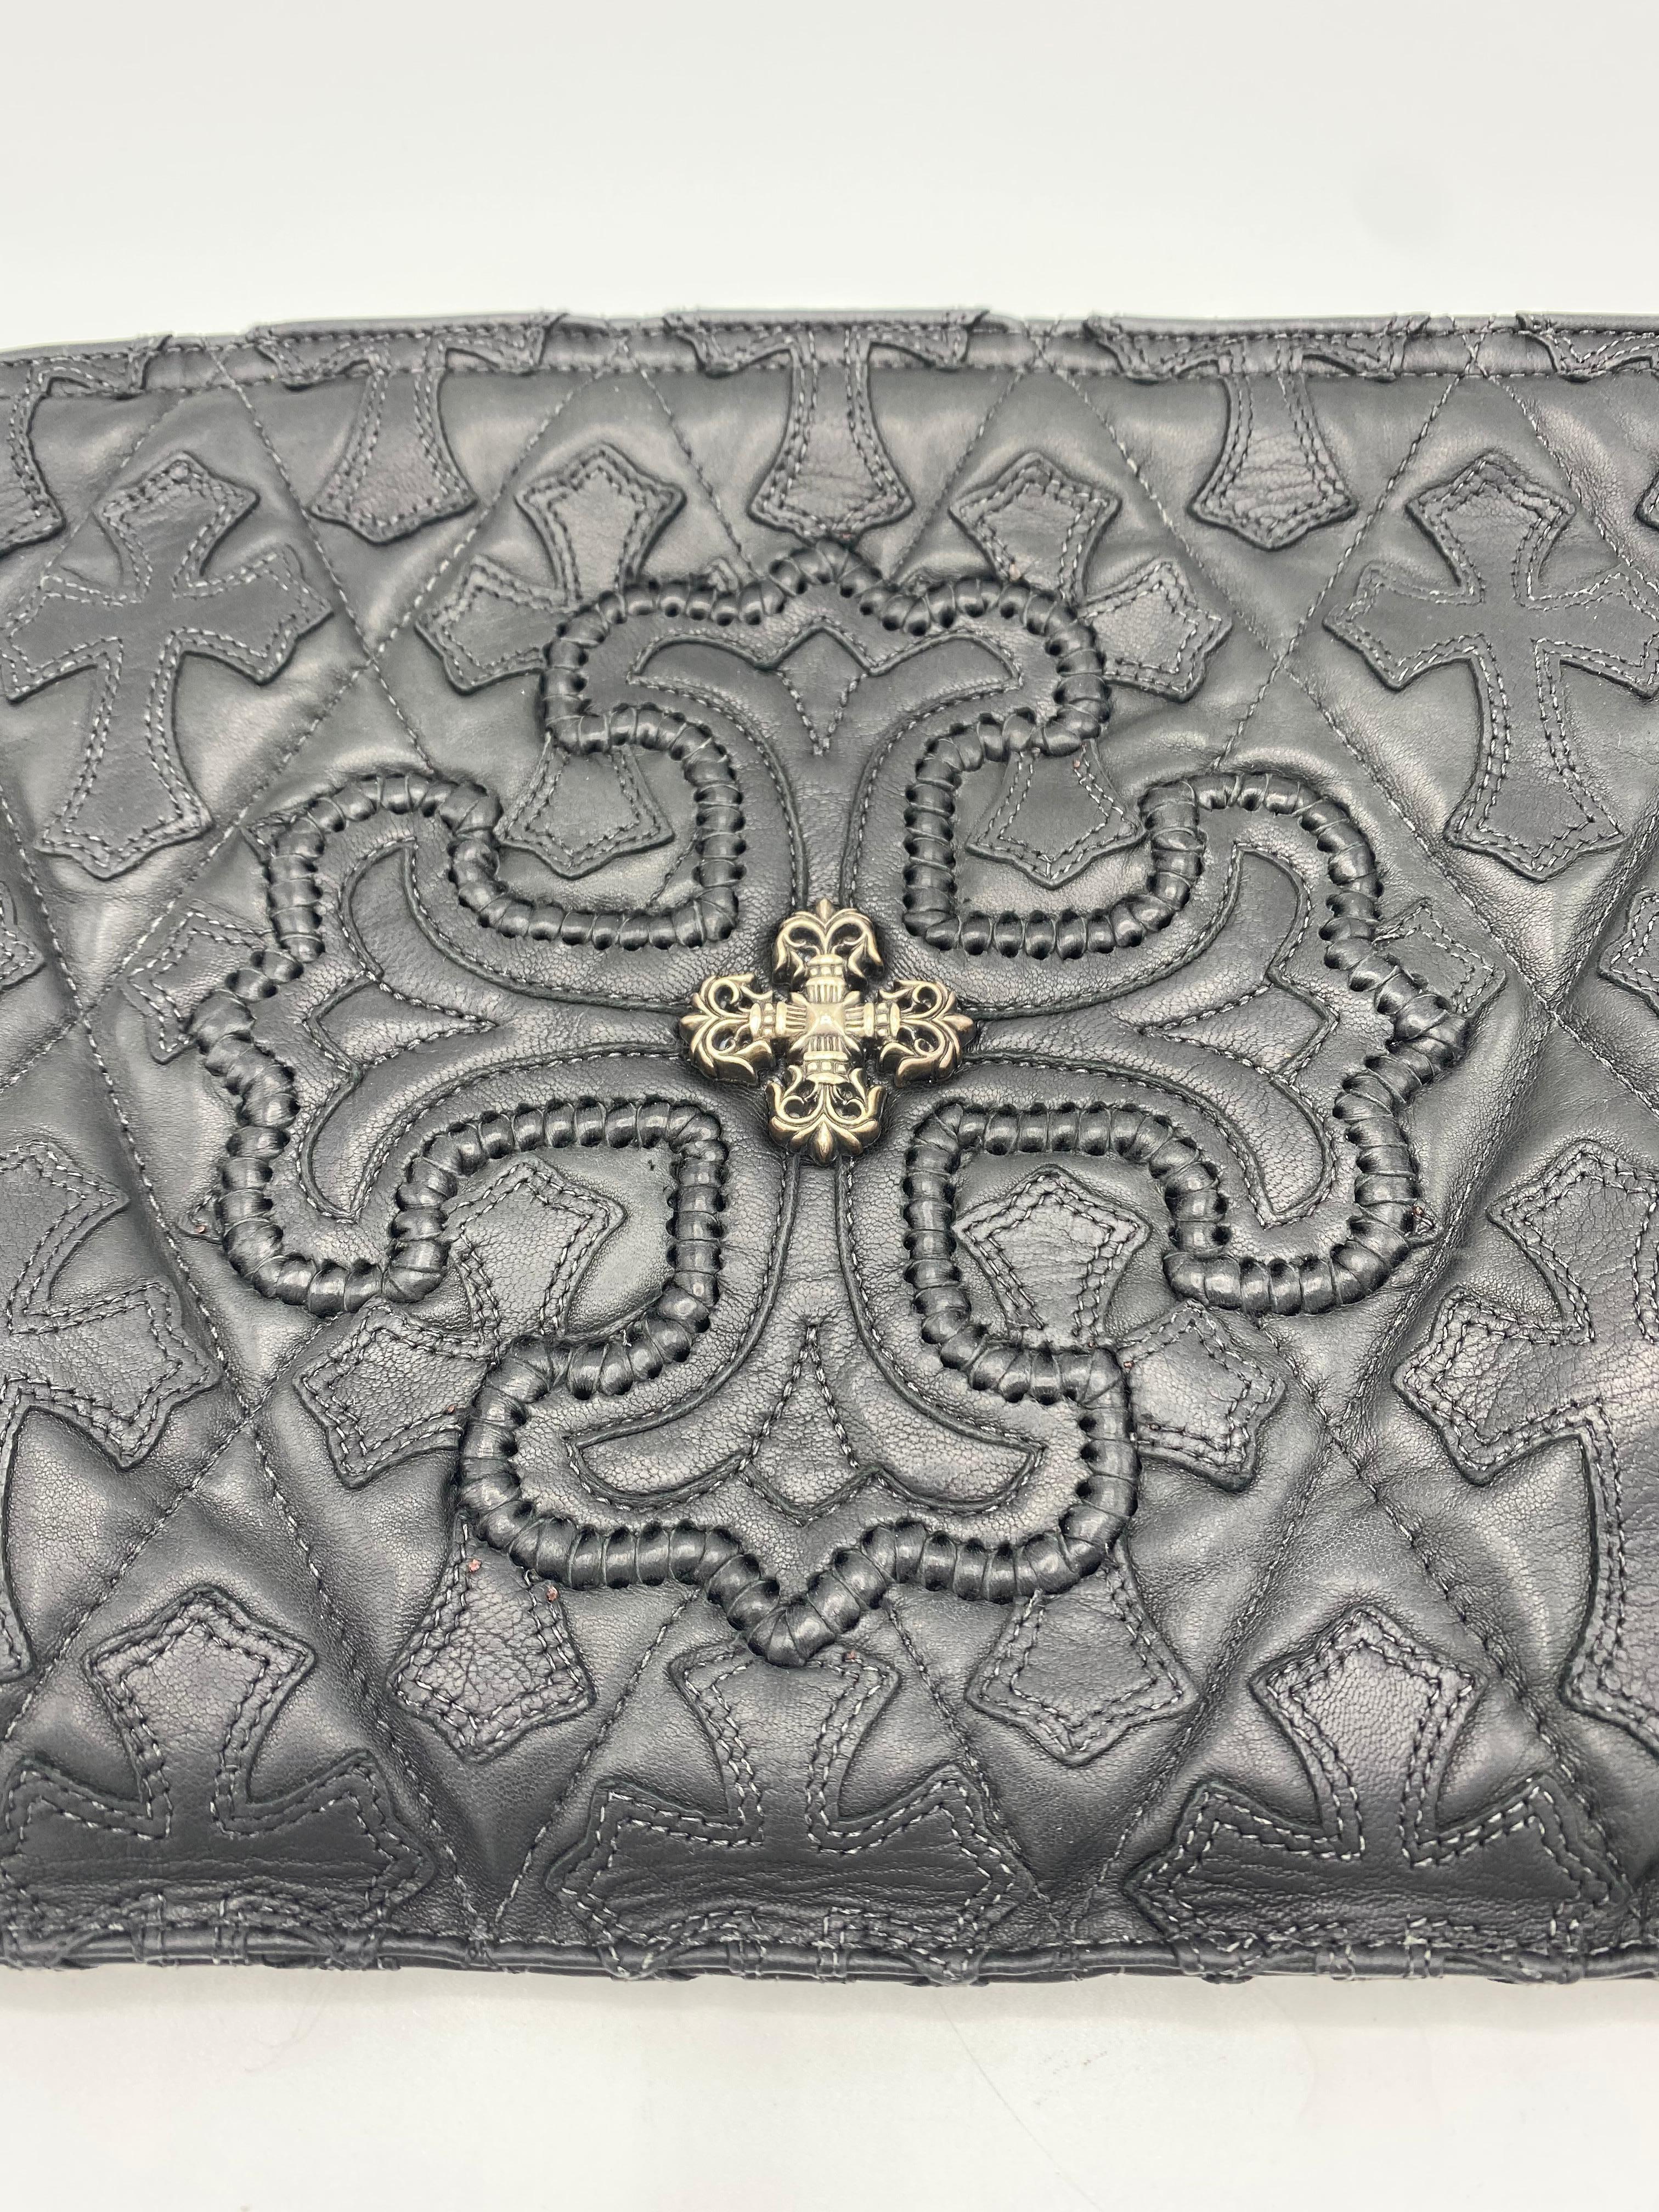 Product details:

The clutch features black leather with sterling silver hardware details, embroidered with the signature crosses, inner zip pocket, outer zip closure, comes with the dust bag.